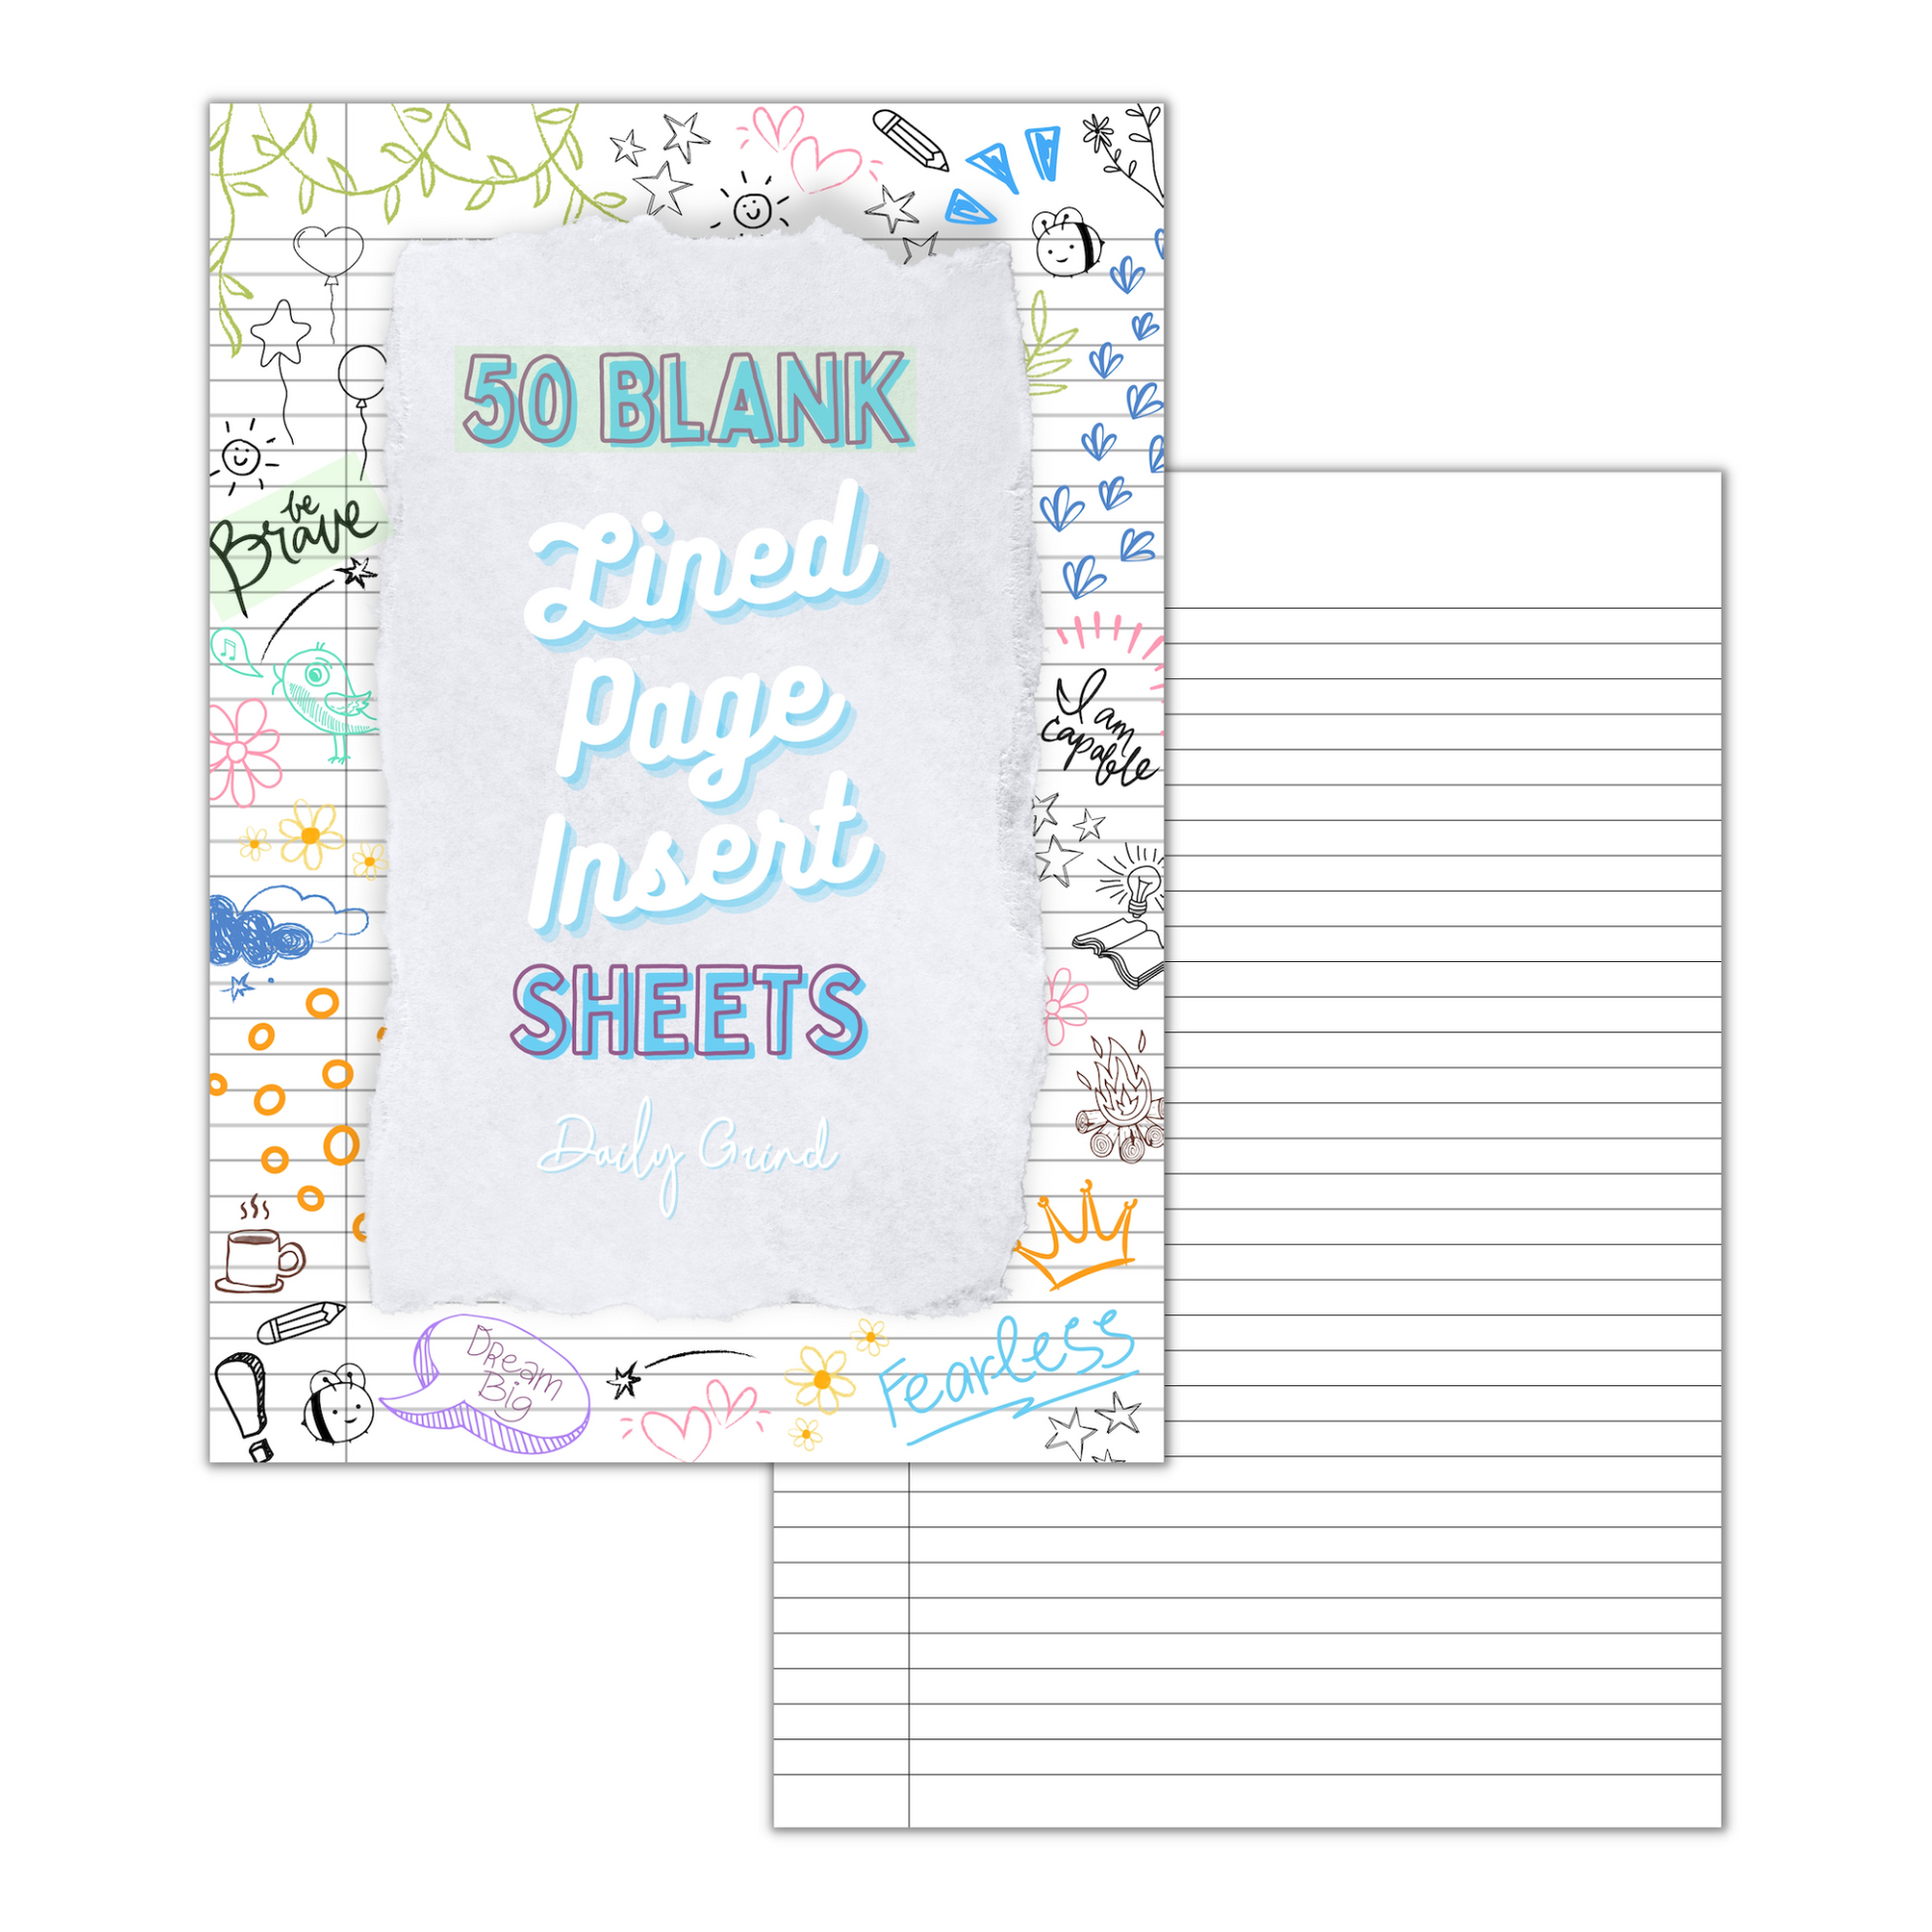 "50 Blank Lined Page Insert Sheets" cover page and blank lined sheet